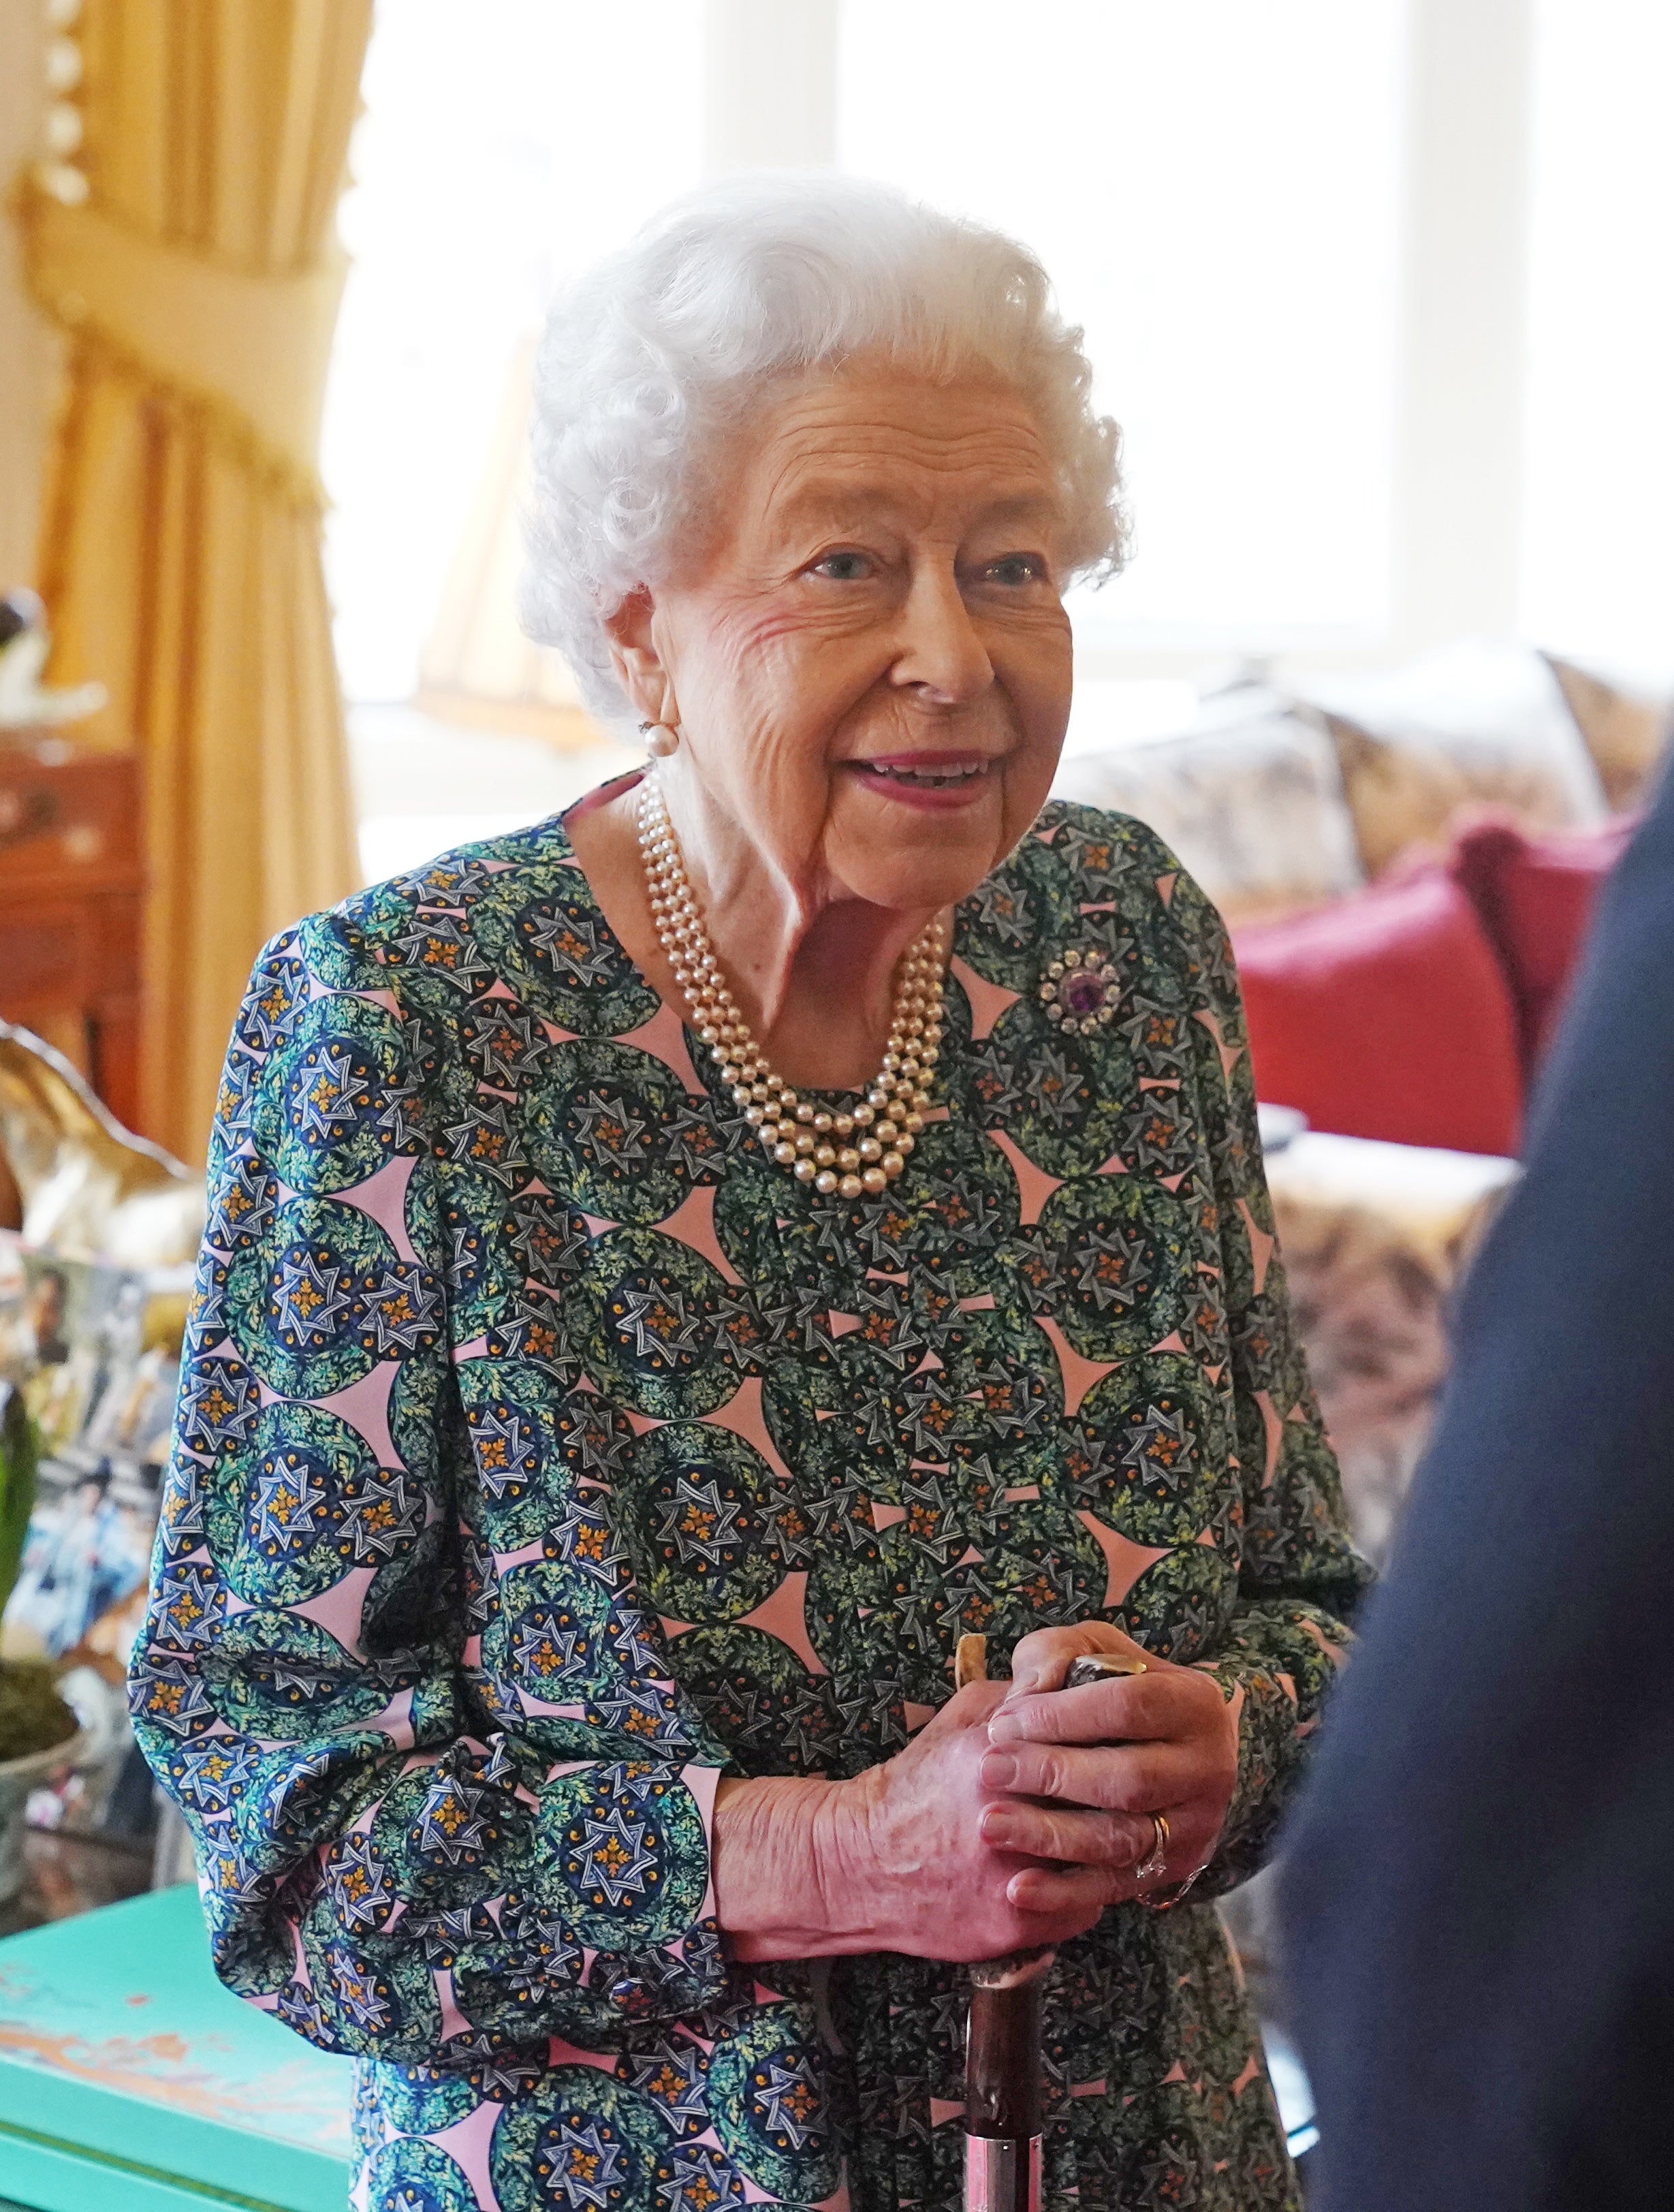 The Queen will respond to her coronavirus diagnosis in a ‘matter-of-fact’ and ‘stoic’ manner, a royal writer has said.